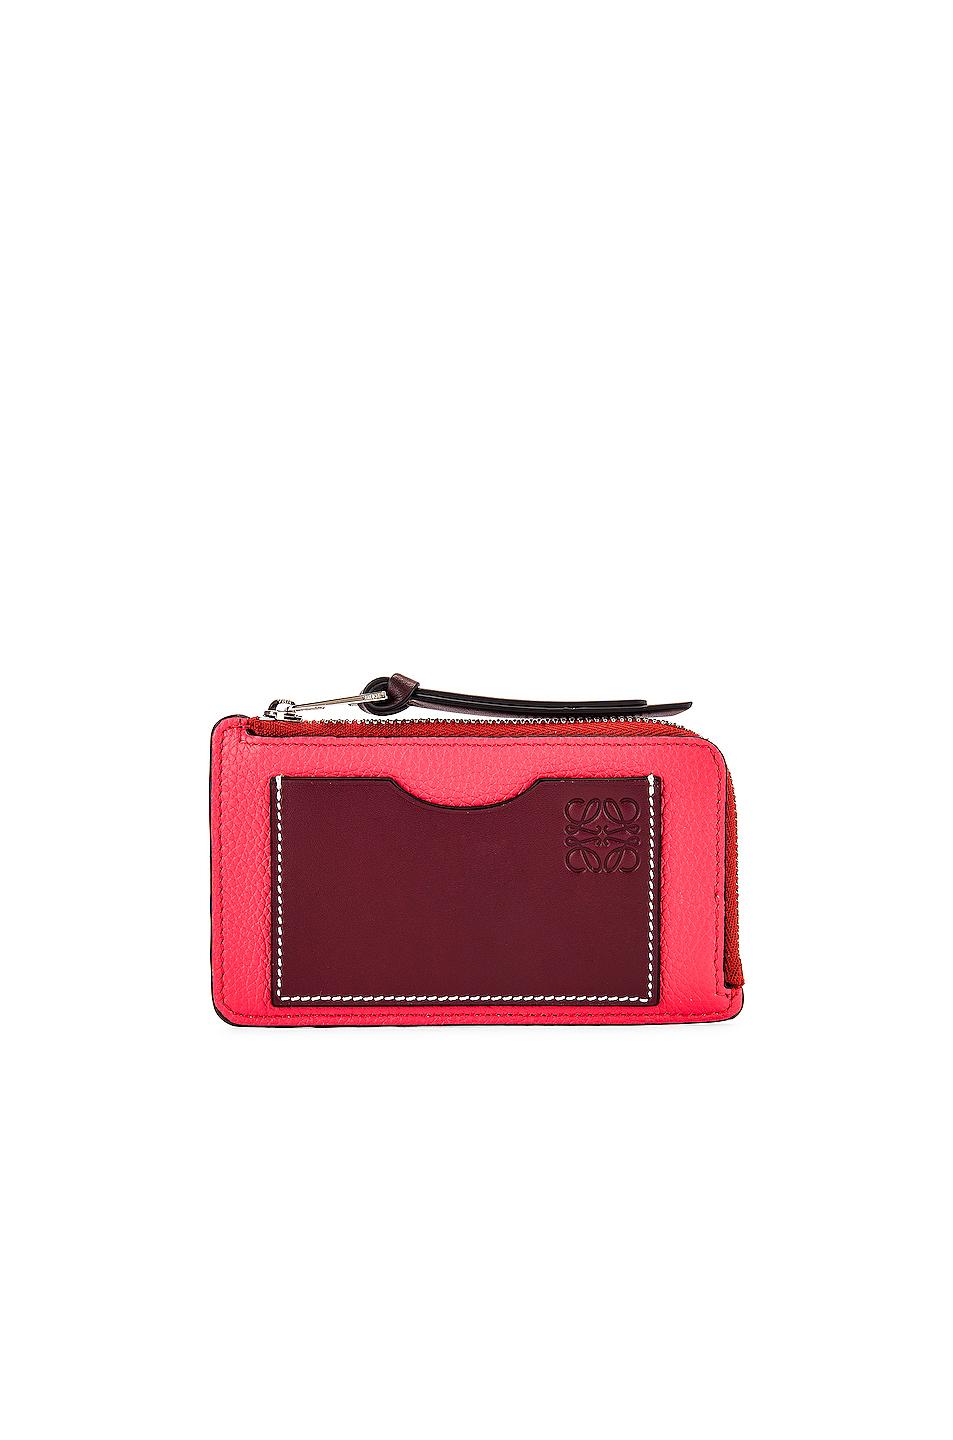 Loewe Leather Large Coin Cardholder in Poppy Pink (Pink) - Lyst